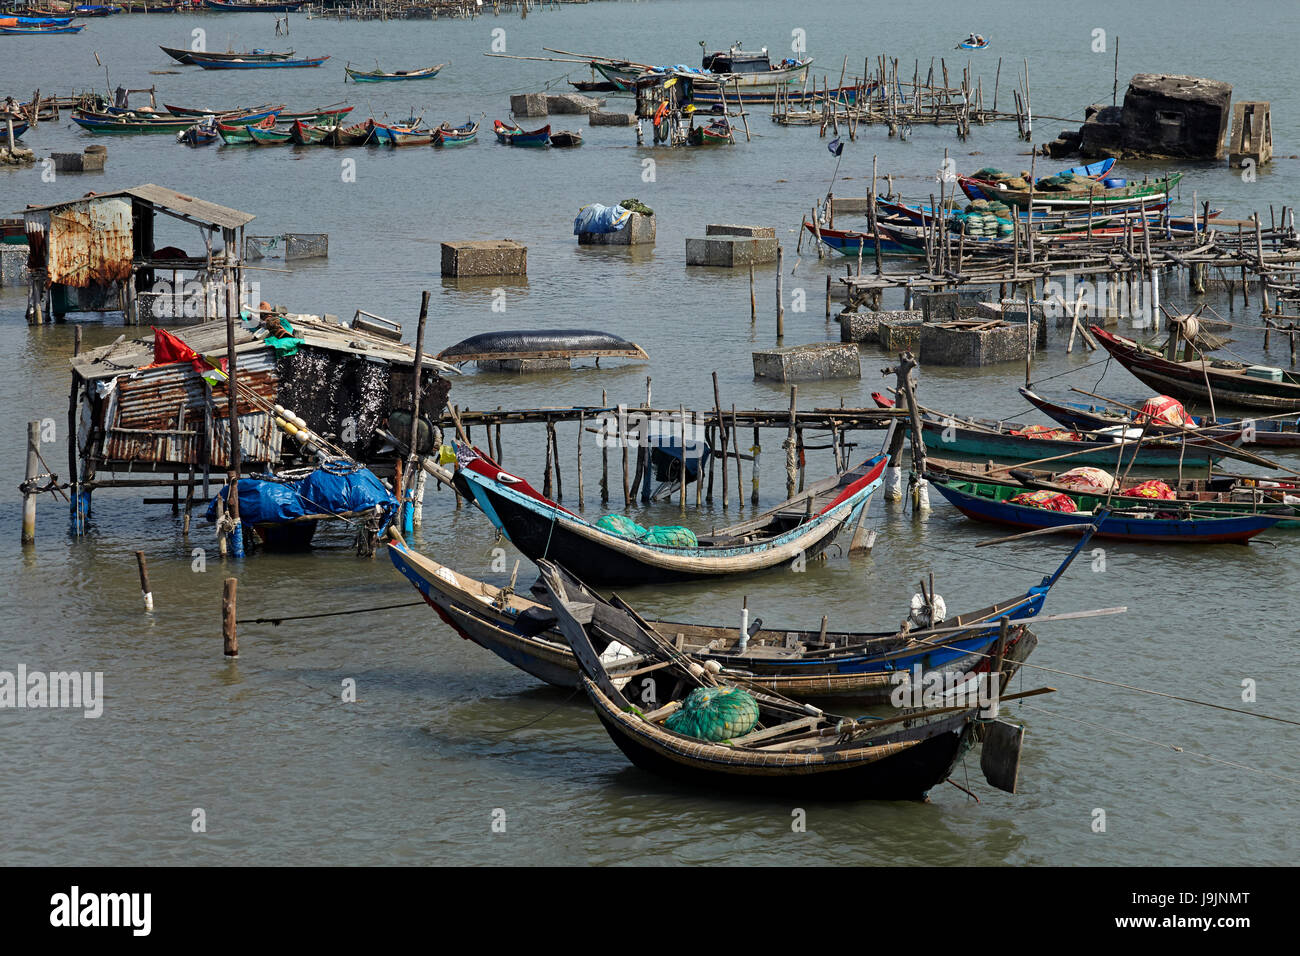 Fishing boats on Dam Lap An, by Lang Co, Thua Thien-Hue Province, North Central Coast, Vietnam Stock Photo